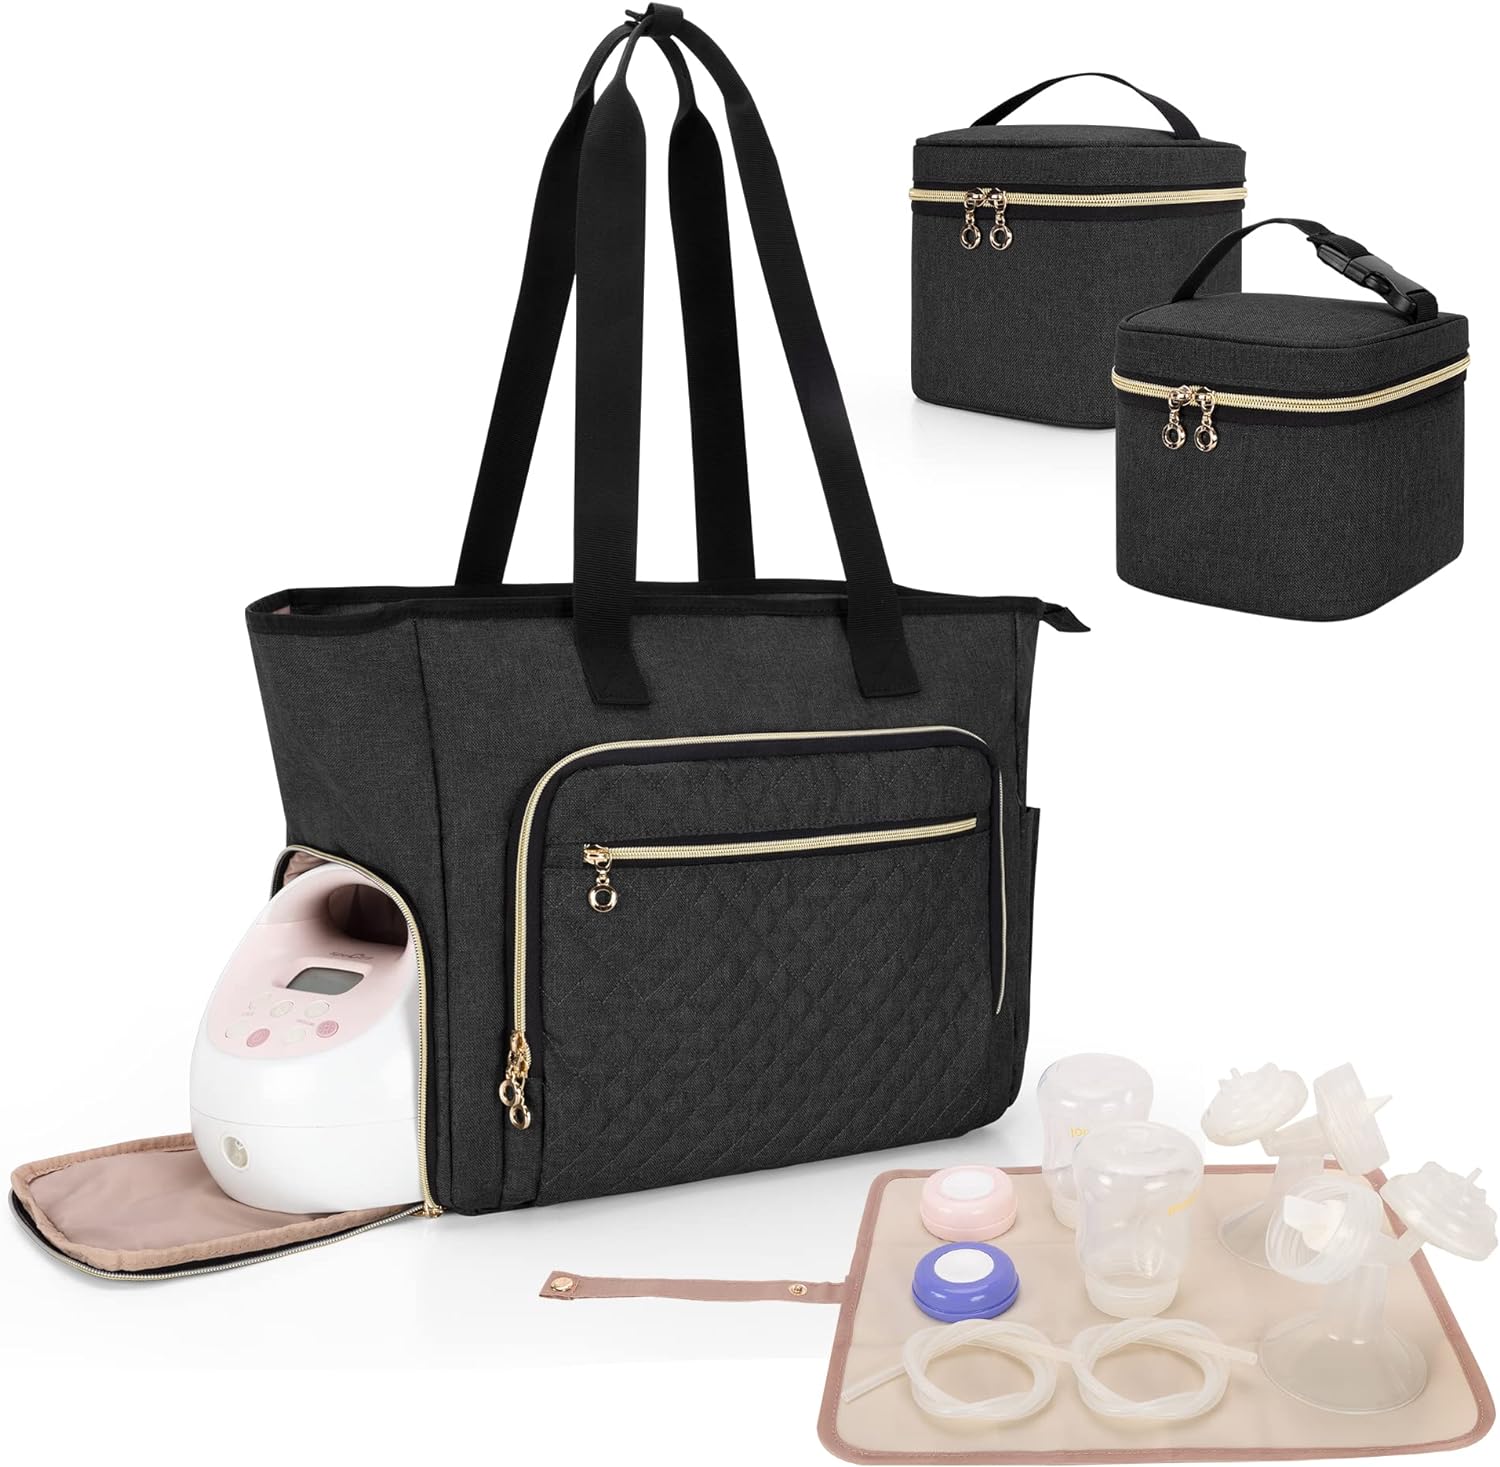 Luxja Breast Pump Bag (with a Breastmilk Cooler Bag, a Small Carrying Case and a Waterproof Mat) Compatible with Spectra S1 and S2, Pumping Bag for Breast Pump and Extra Parts, Black